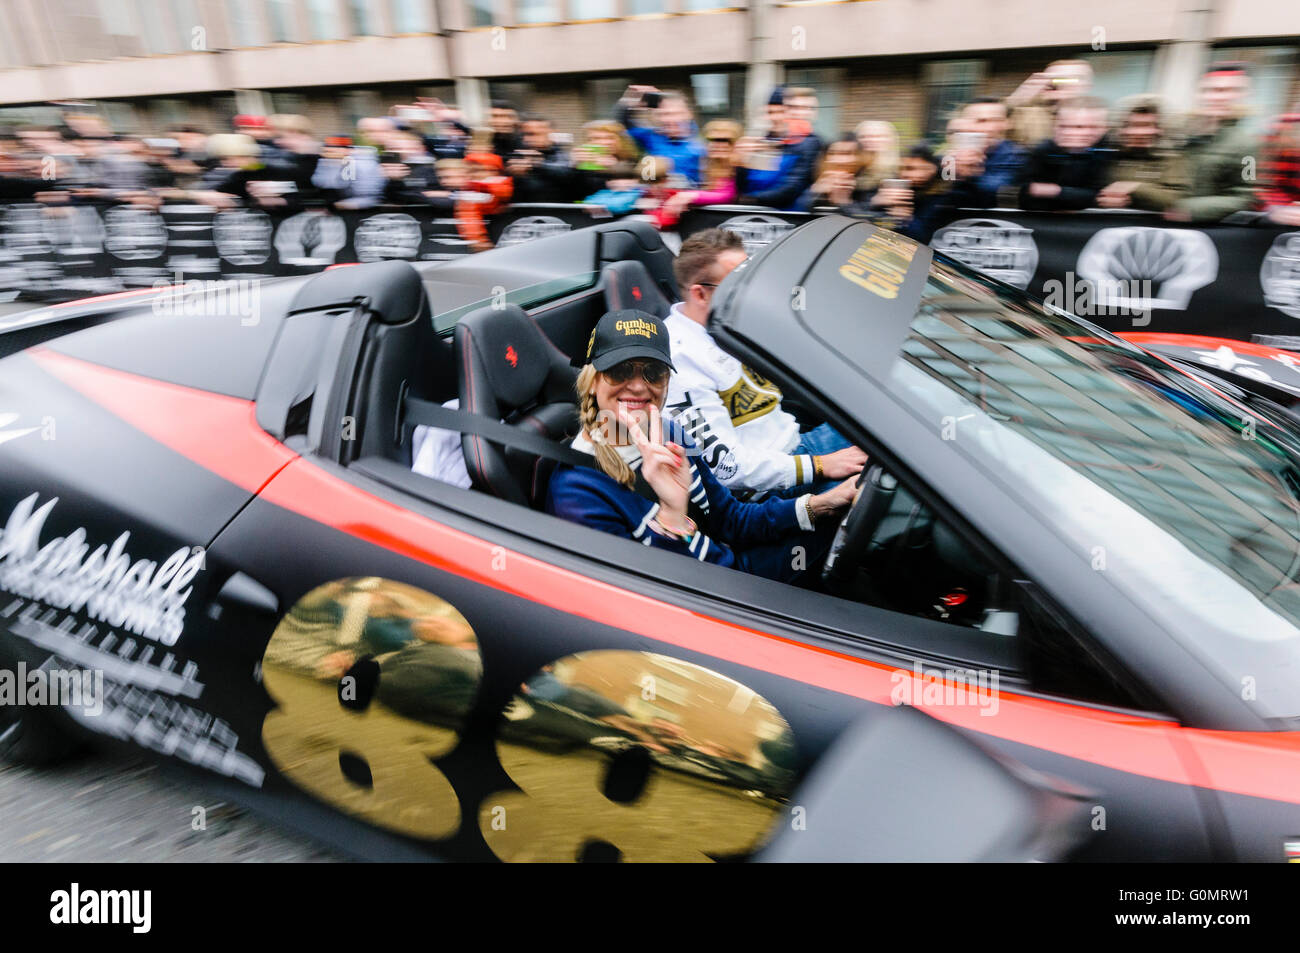 DUBLIN, IRELAND. MAY 01 2016 - A Lamborghini Aventador starts off on a 6 day drive to Bucharest from Dublin as part of the Gumball 3000 rally. Stock Photo